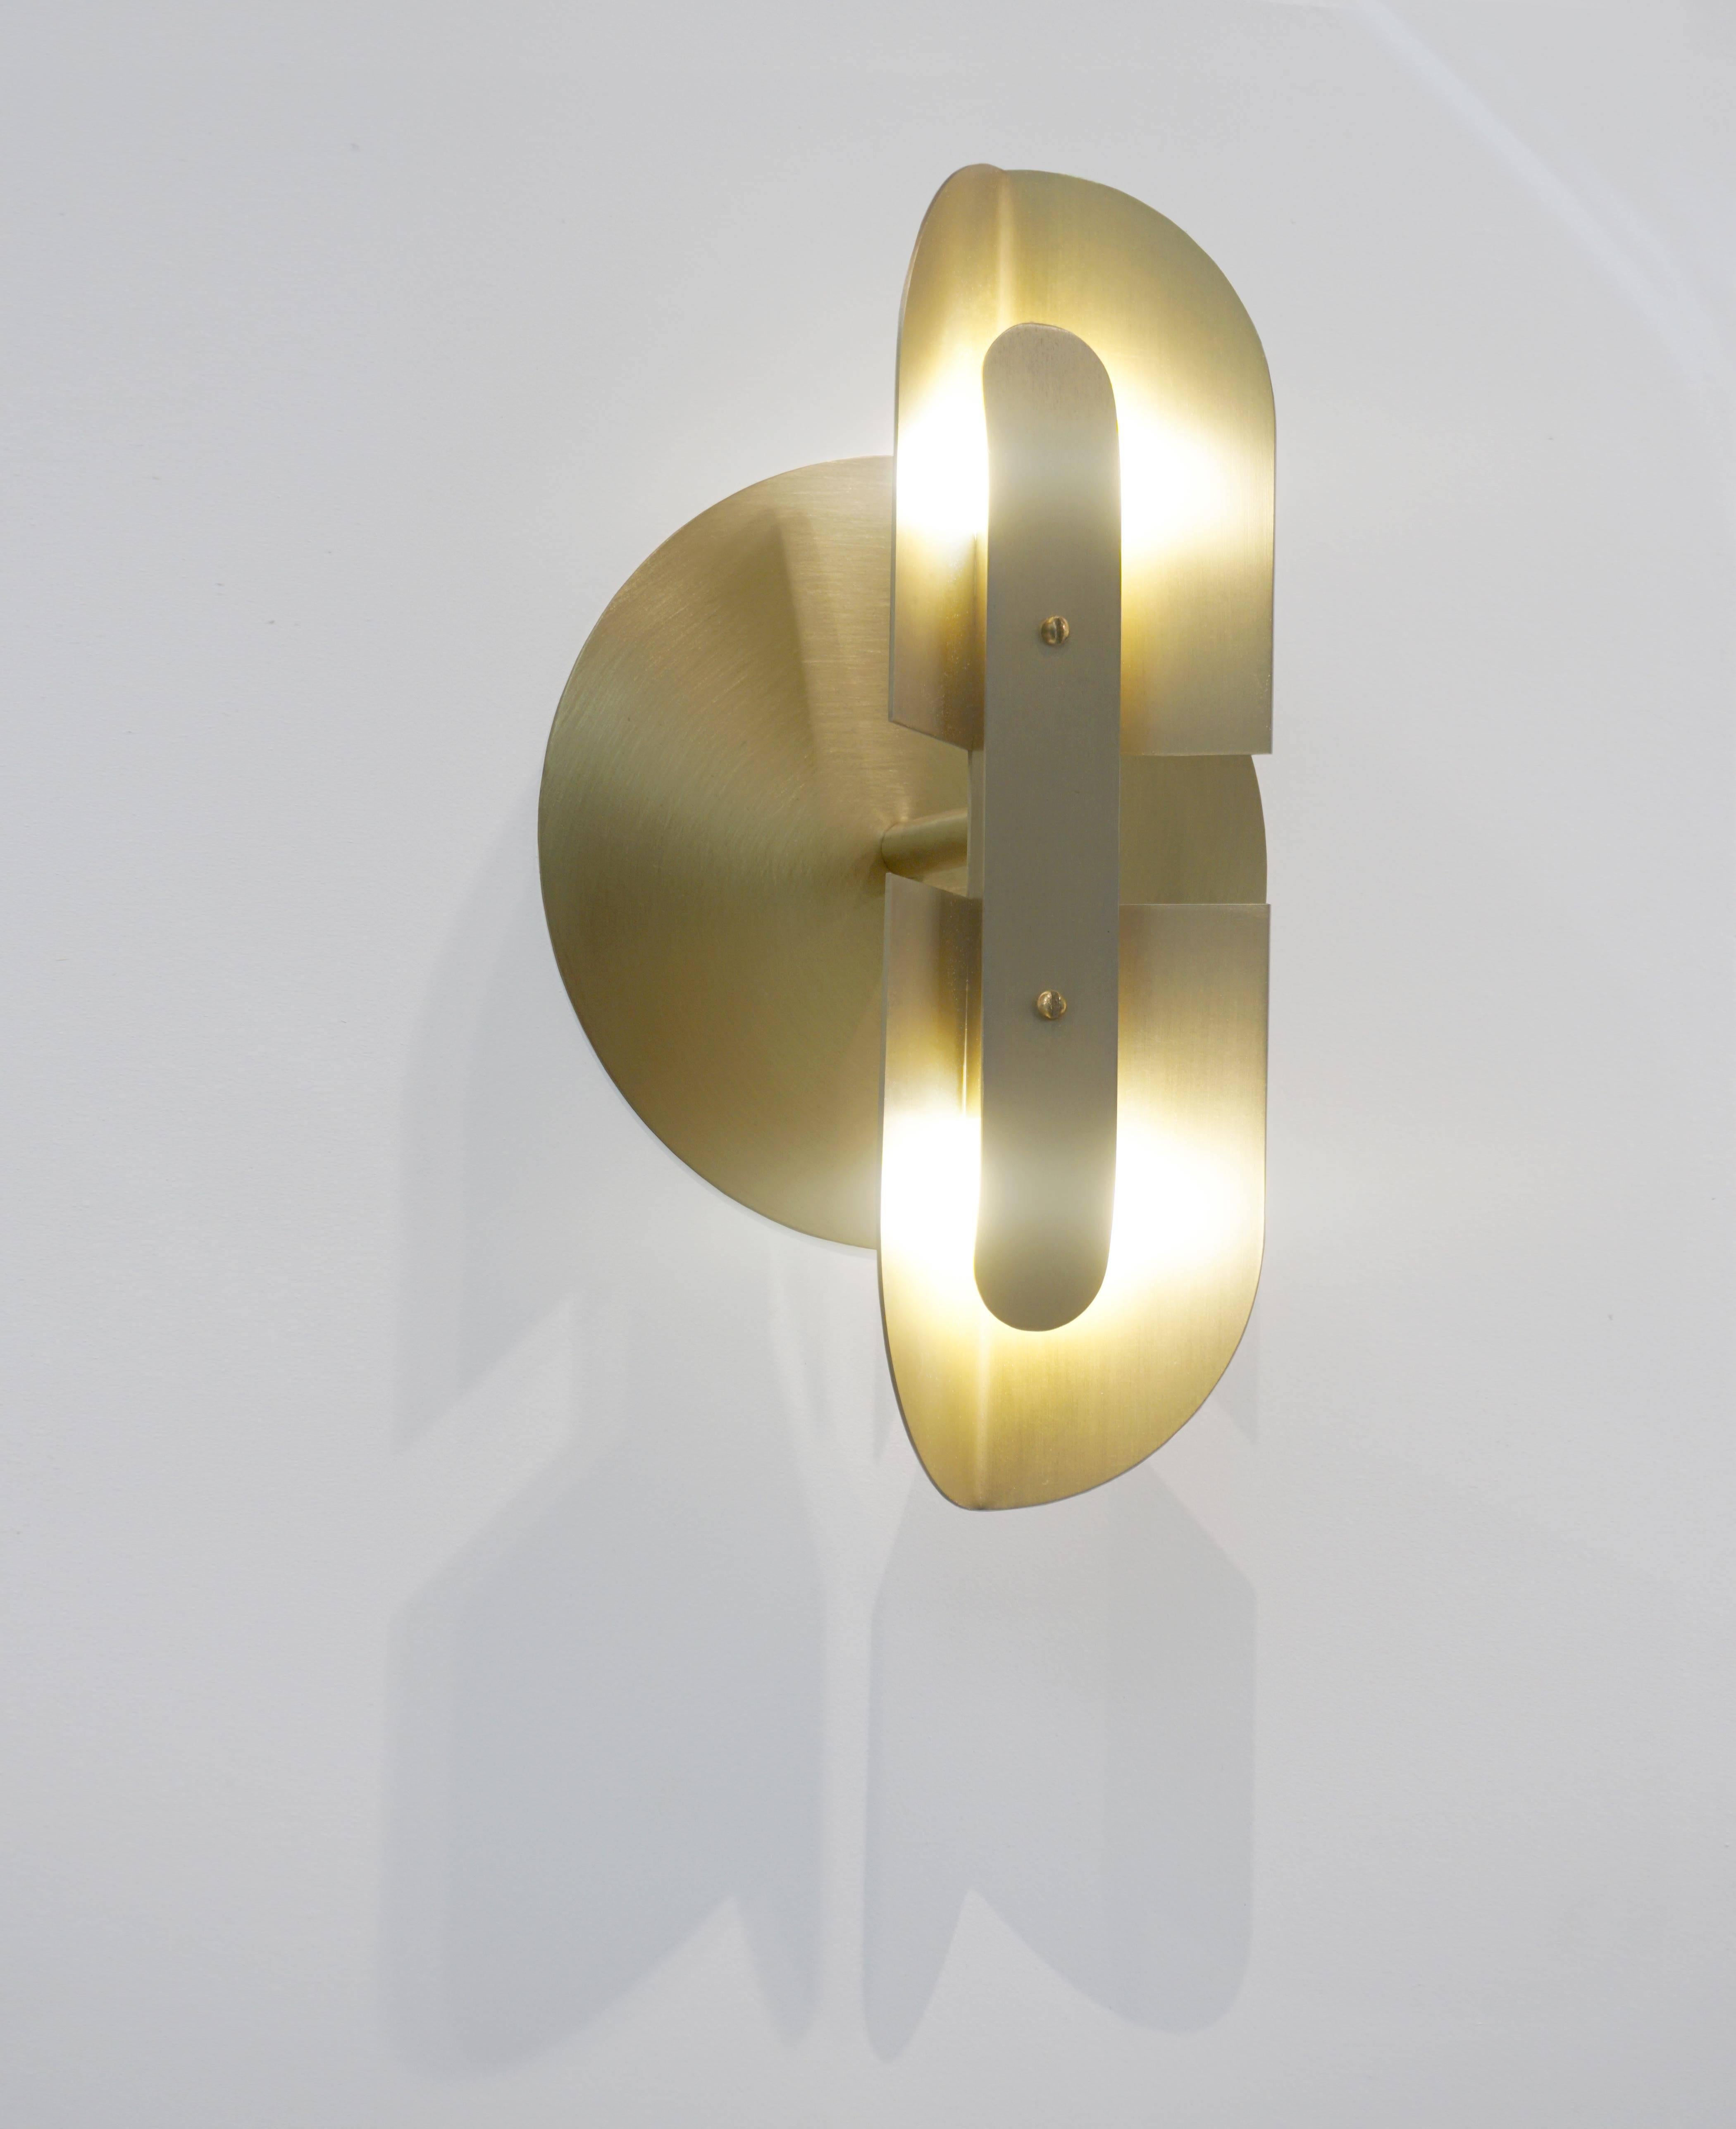 Plated Fold Sconce in Satin Brass by Simon Johns